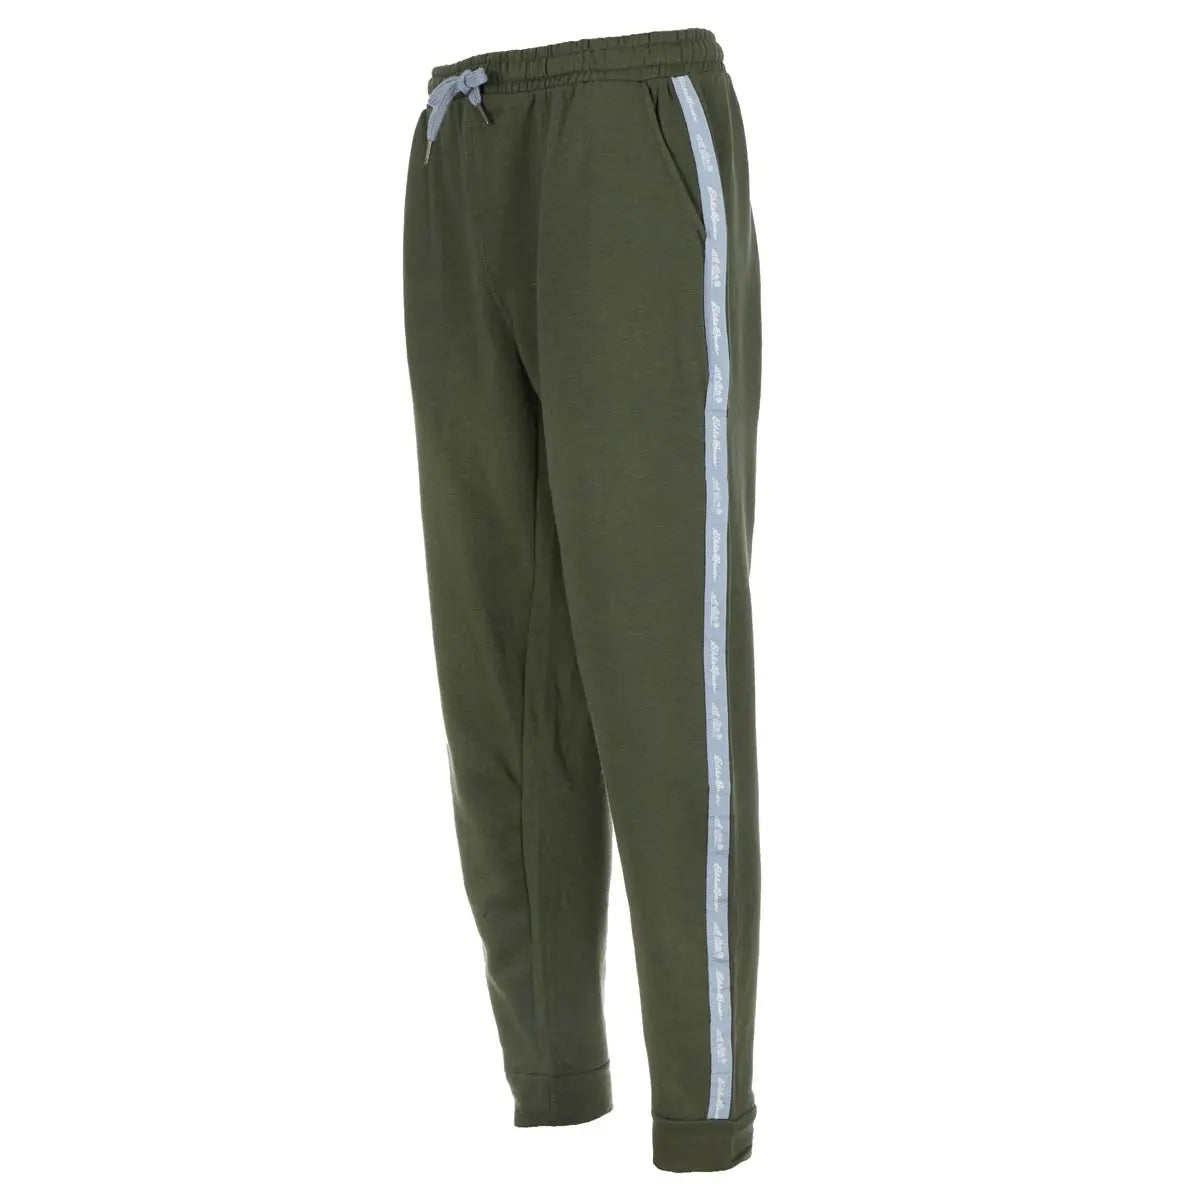 SUEDED JERSEY KNIT JOGGER SLEEP PANT